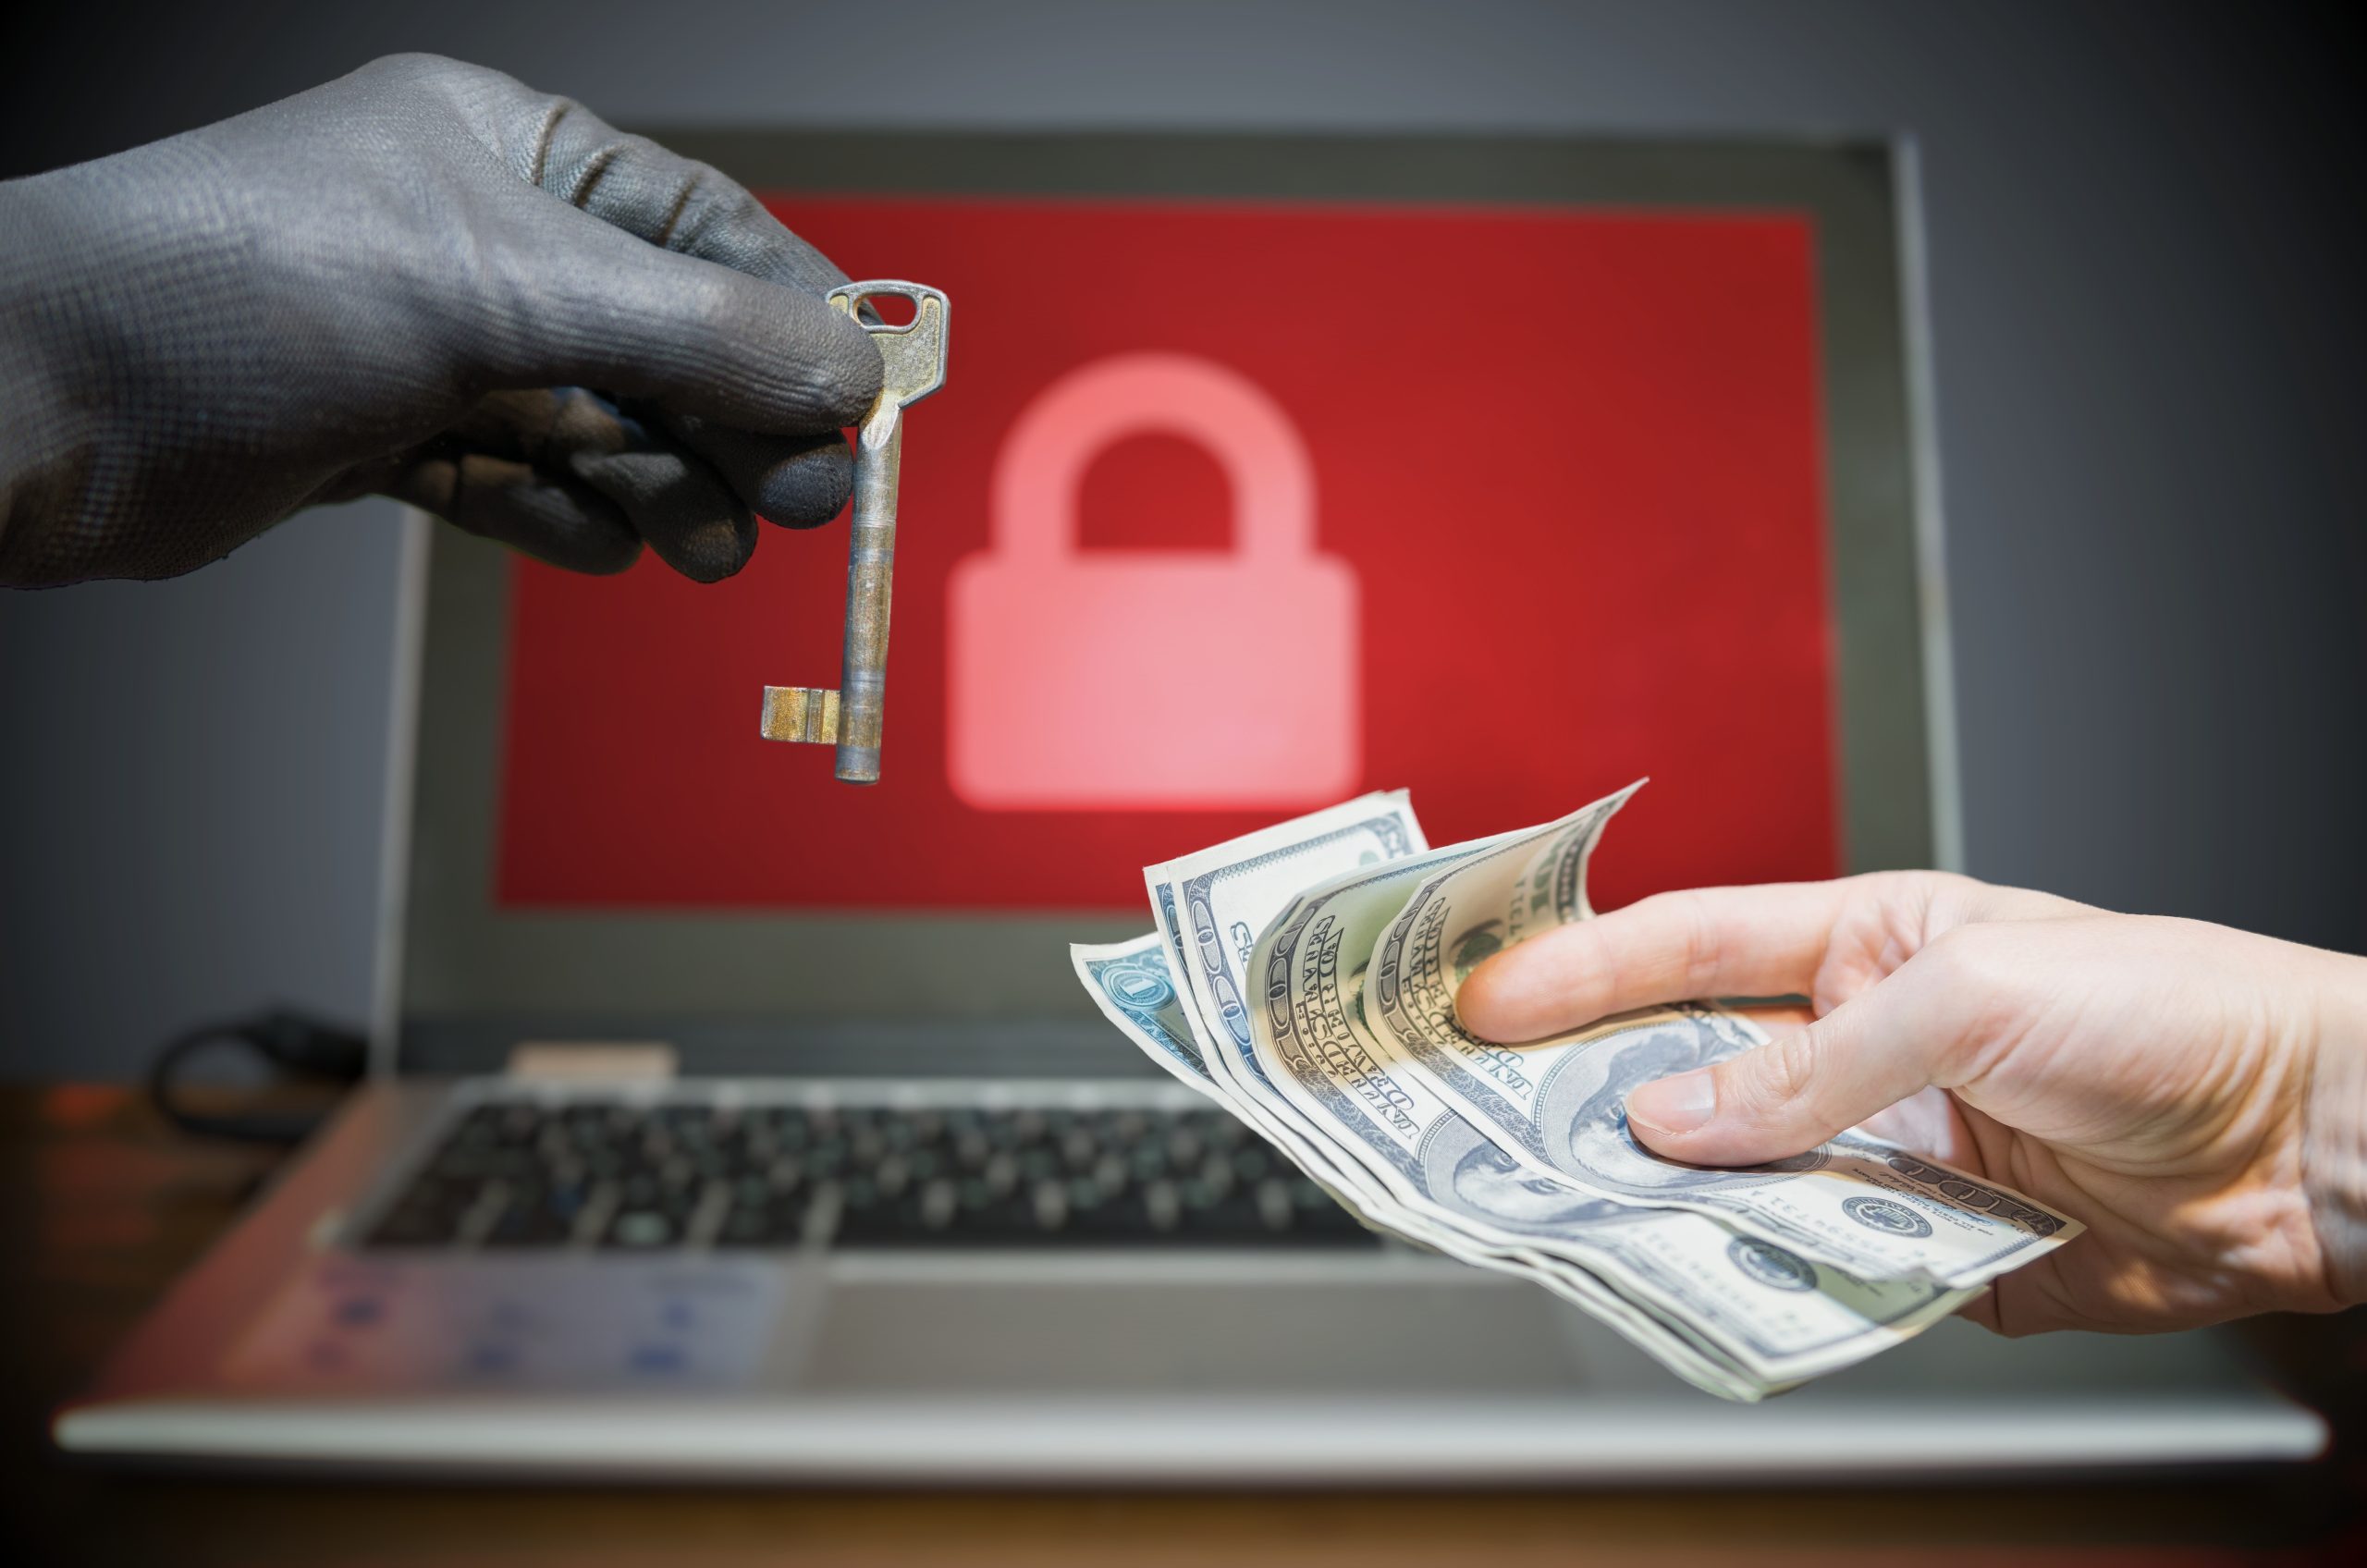 Ransomware: To Pay or Not?